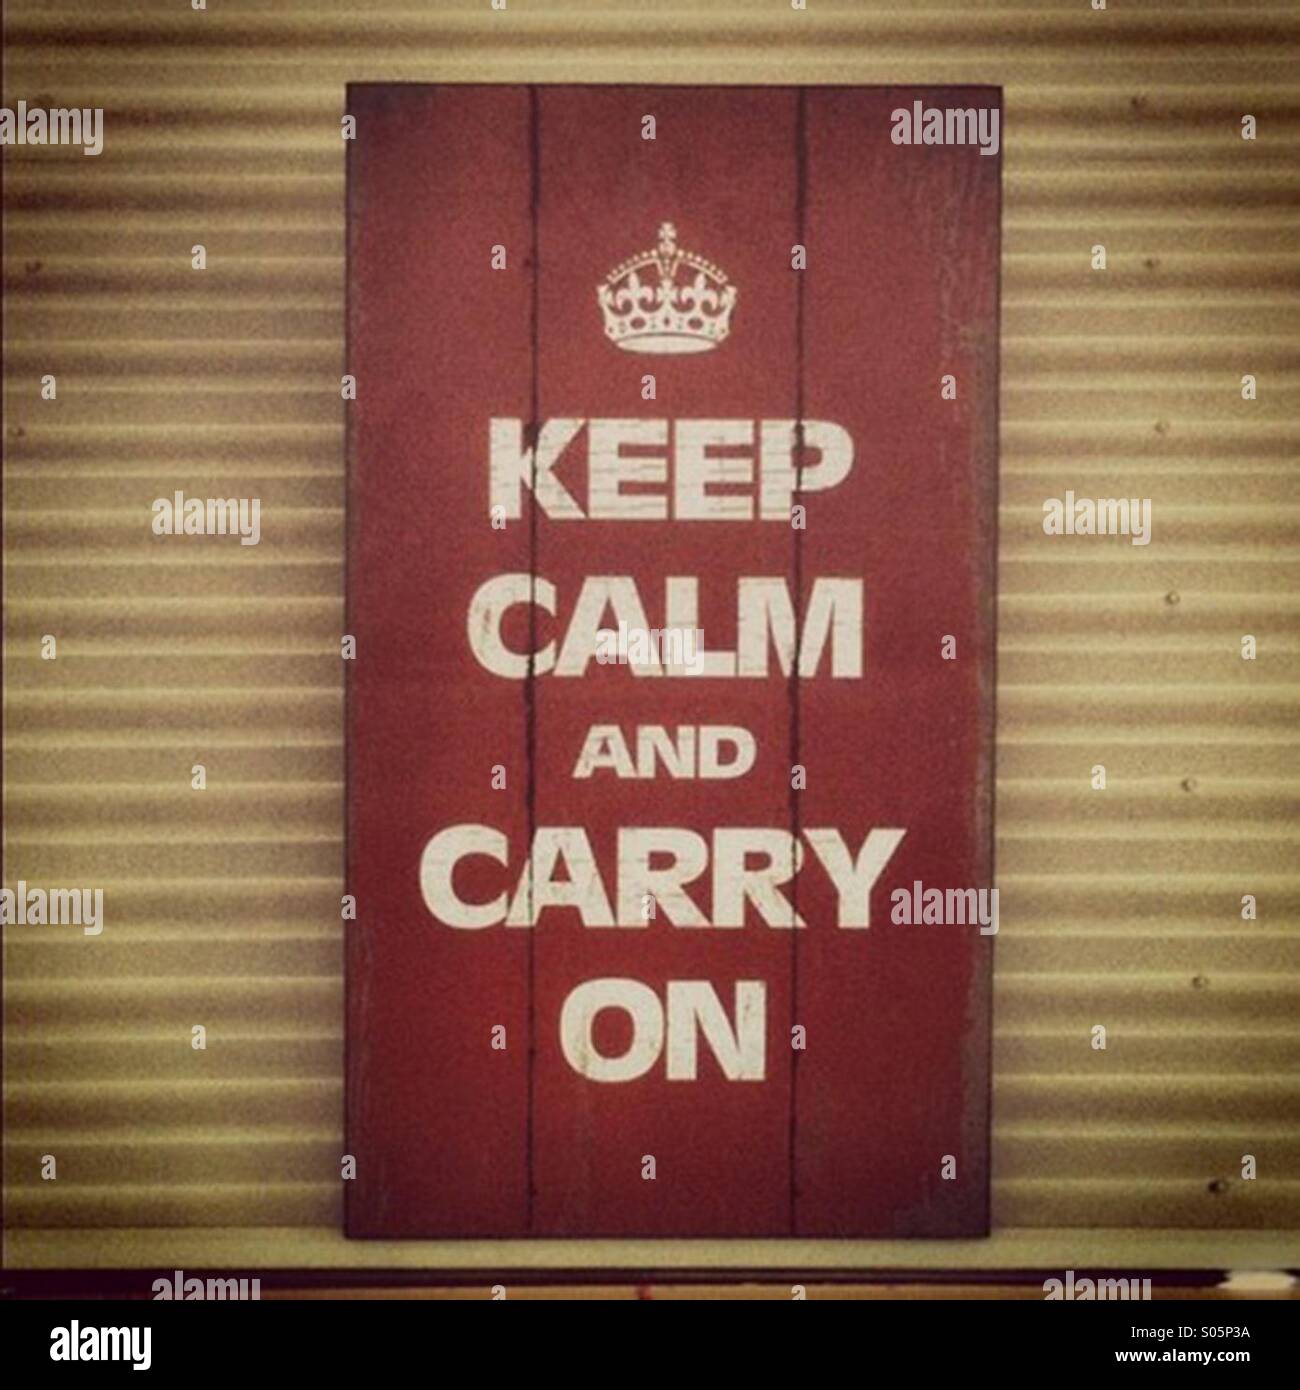 Keep calm and carry on wooden sign Banque D'Images